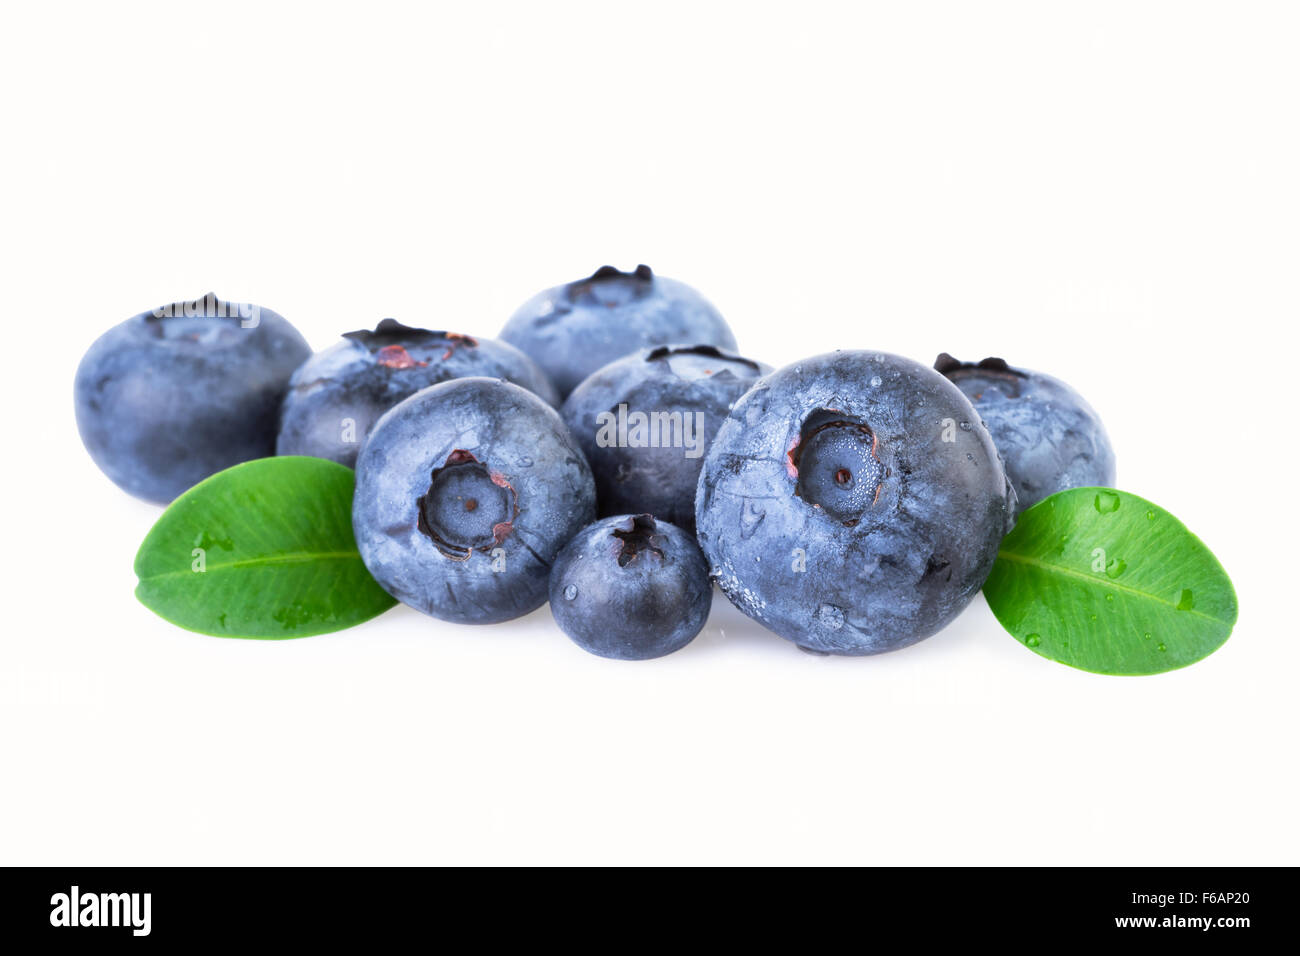 Blueberries with green leafs isolated on white Stock Photo